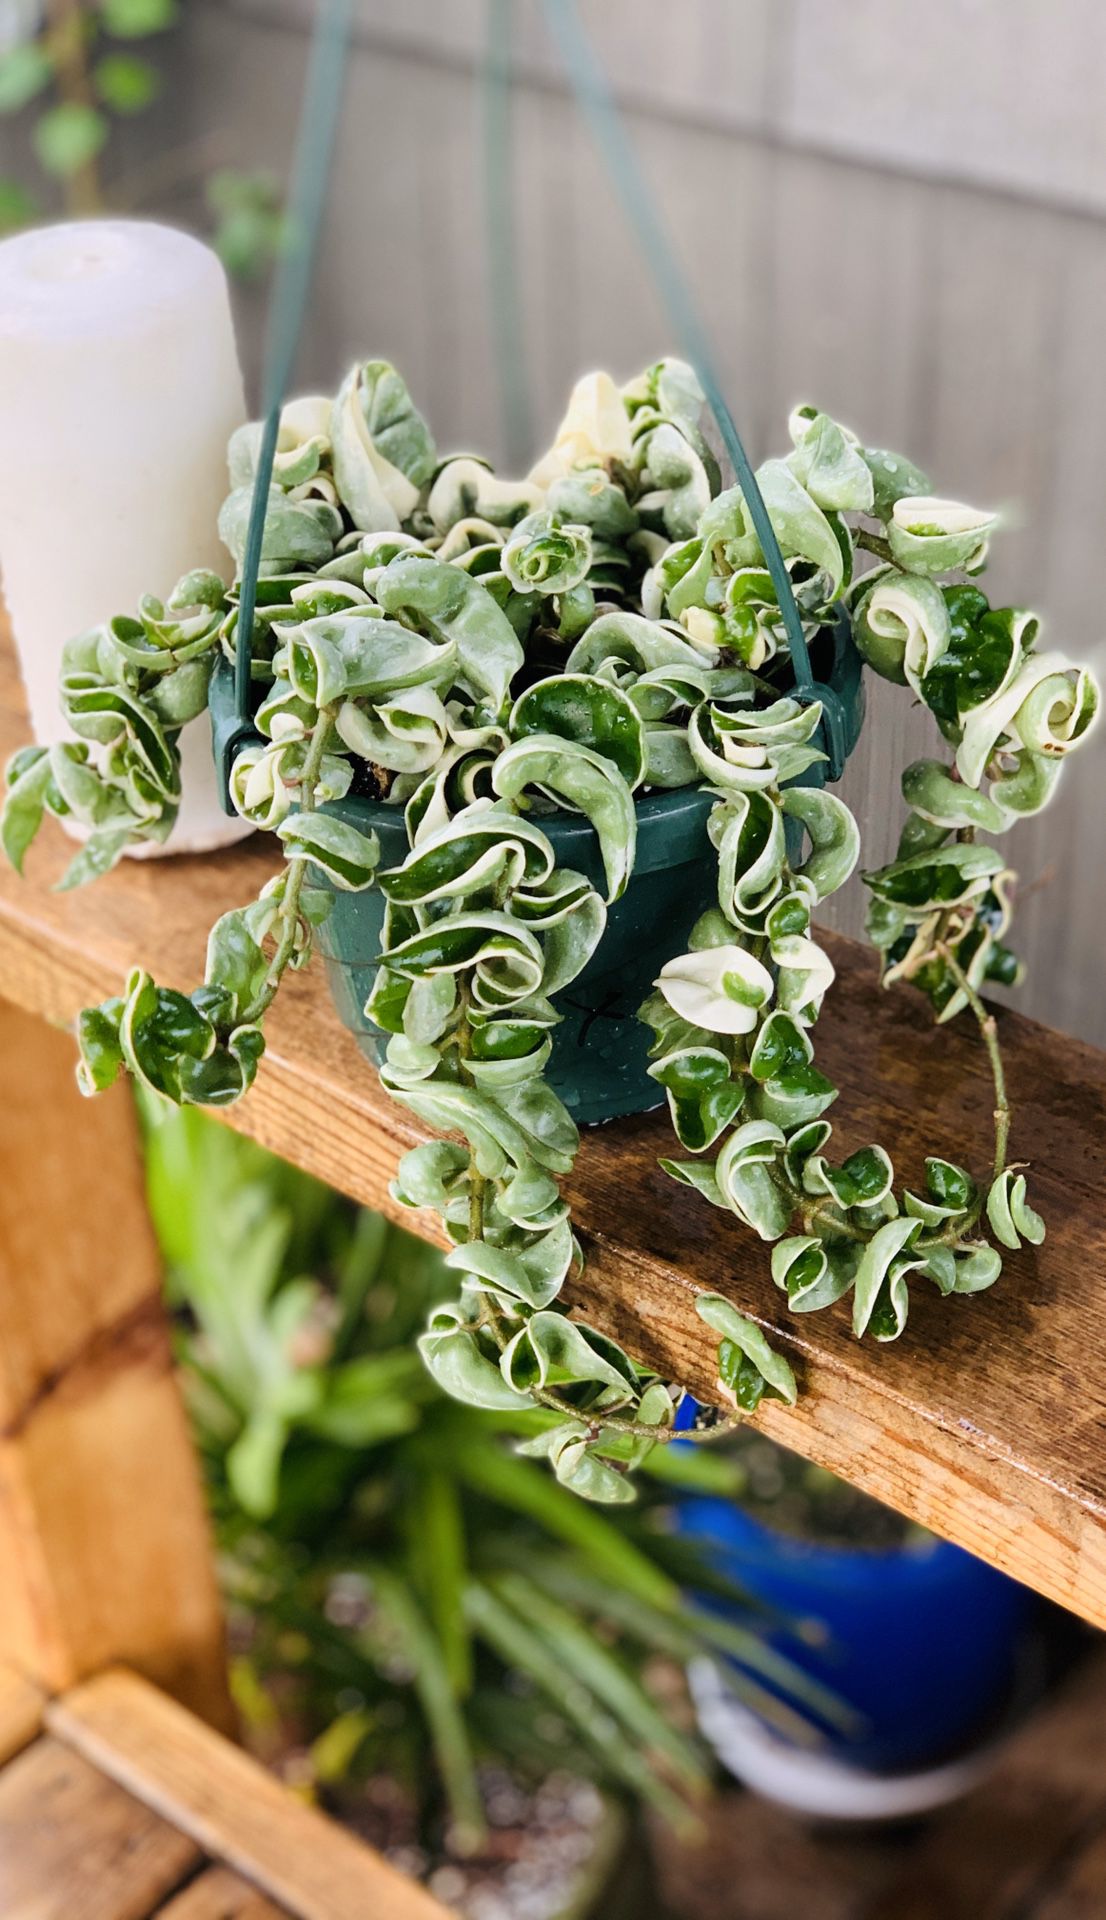 Live indoor VARIEGATED Hoya Hindu Rope plant in a plastic nursery planter pot—firm price